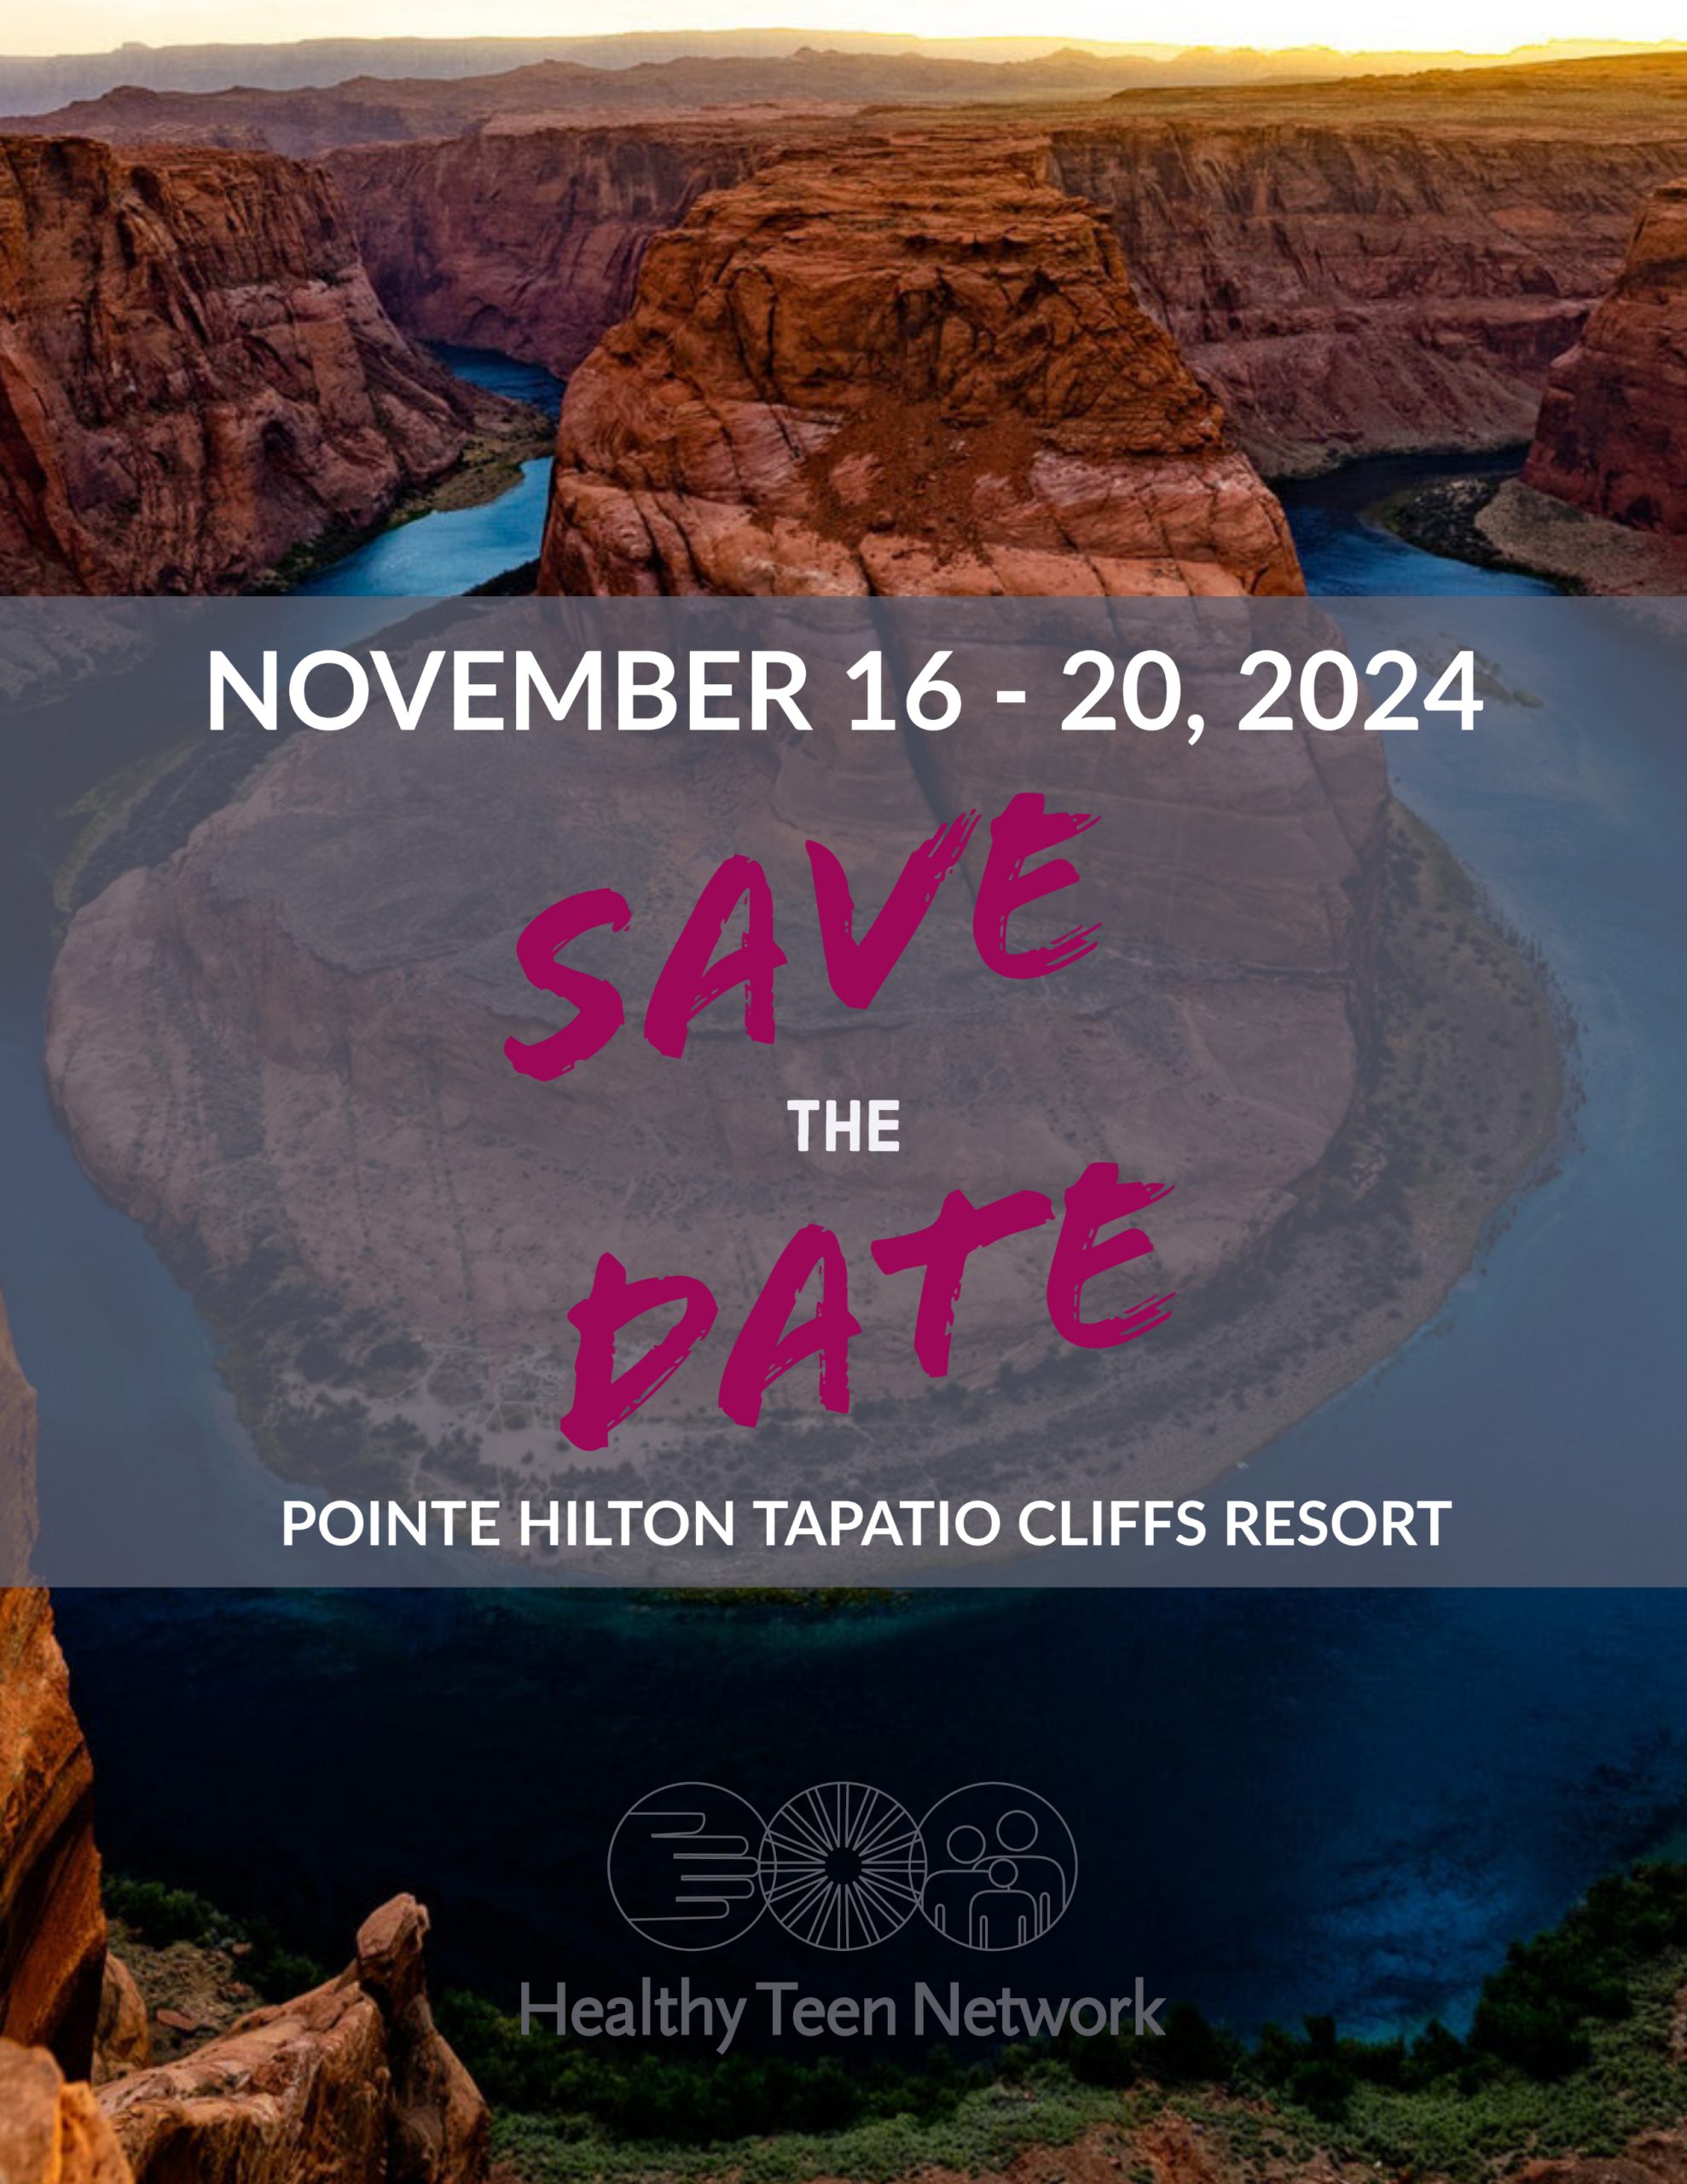 photo of blue river winding through red rock canyons. save the date for November 16-20, 2024 at Pointe Hilton Tapatio Cliffs Resort